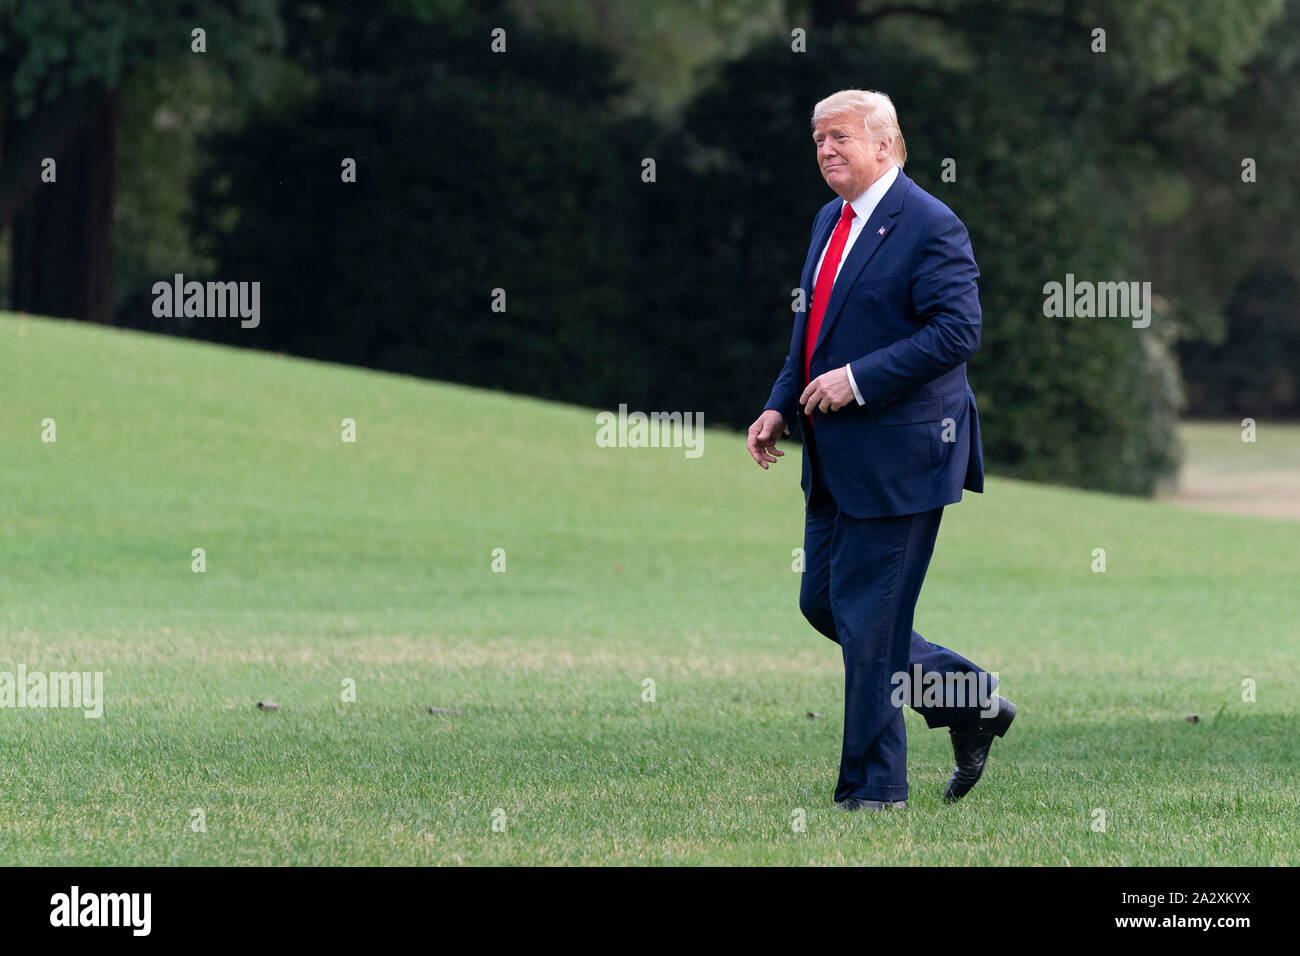 Washington, United States Of America. 03rd Oct, 2019. United States President Donald J. Trump returns to the White House in Washington, DC after signing an executive order in The Villages, Florida 'Protecting and Improving Medicare' for senior citizens on Thursday, October 3, 2019. Credit: Chris Kleponis/Pool via CNP | usage worldwide Credit: dpa/Alamy Live News Stock Photo